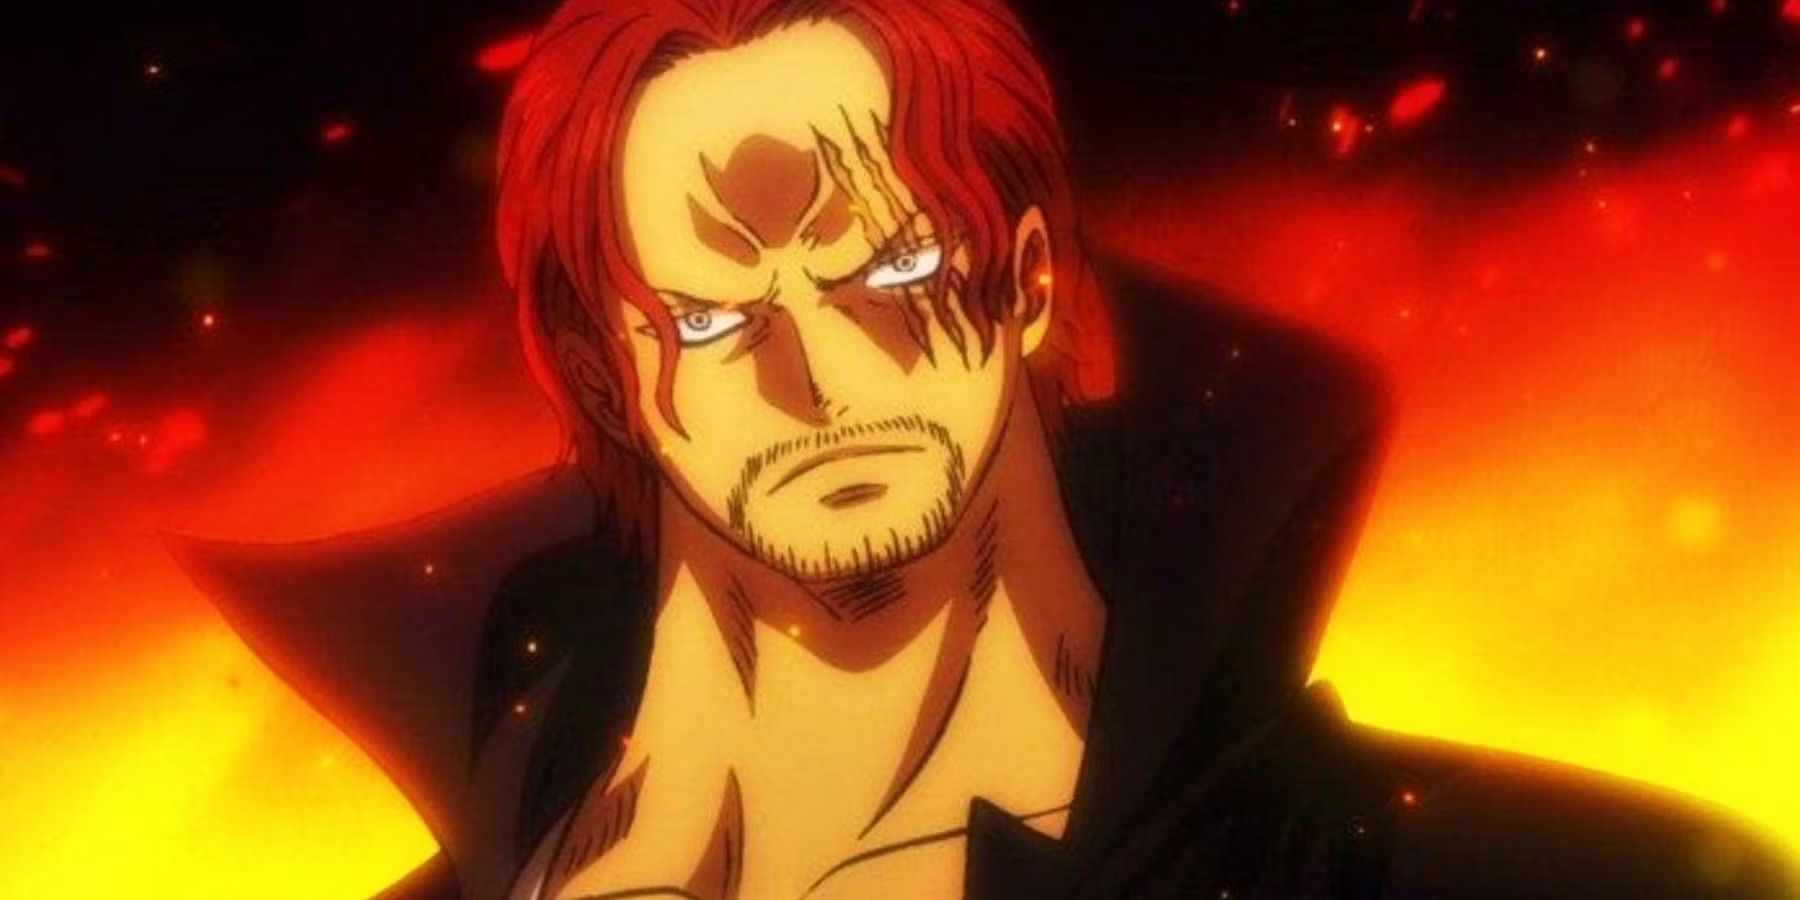 Shanks in One Piece, surrounded by flames